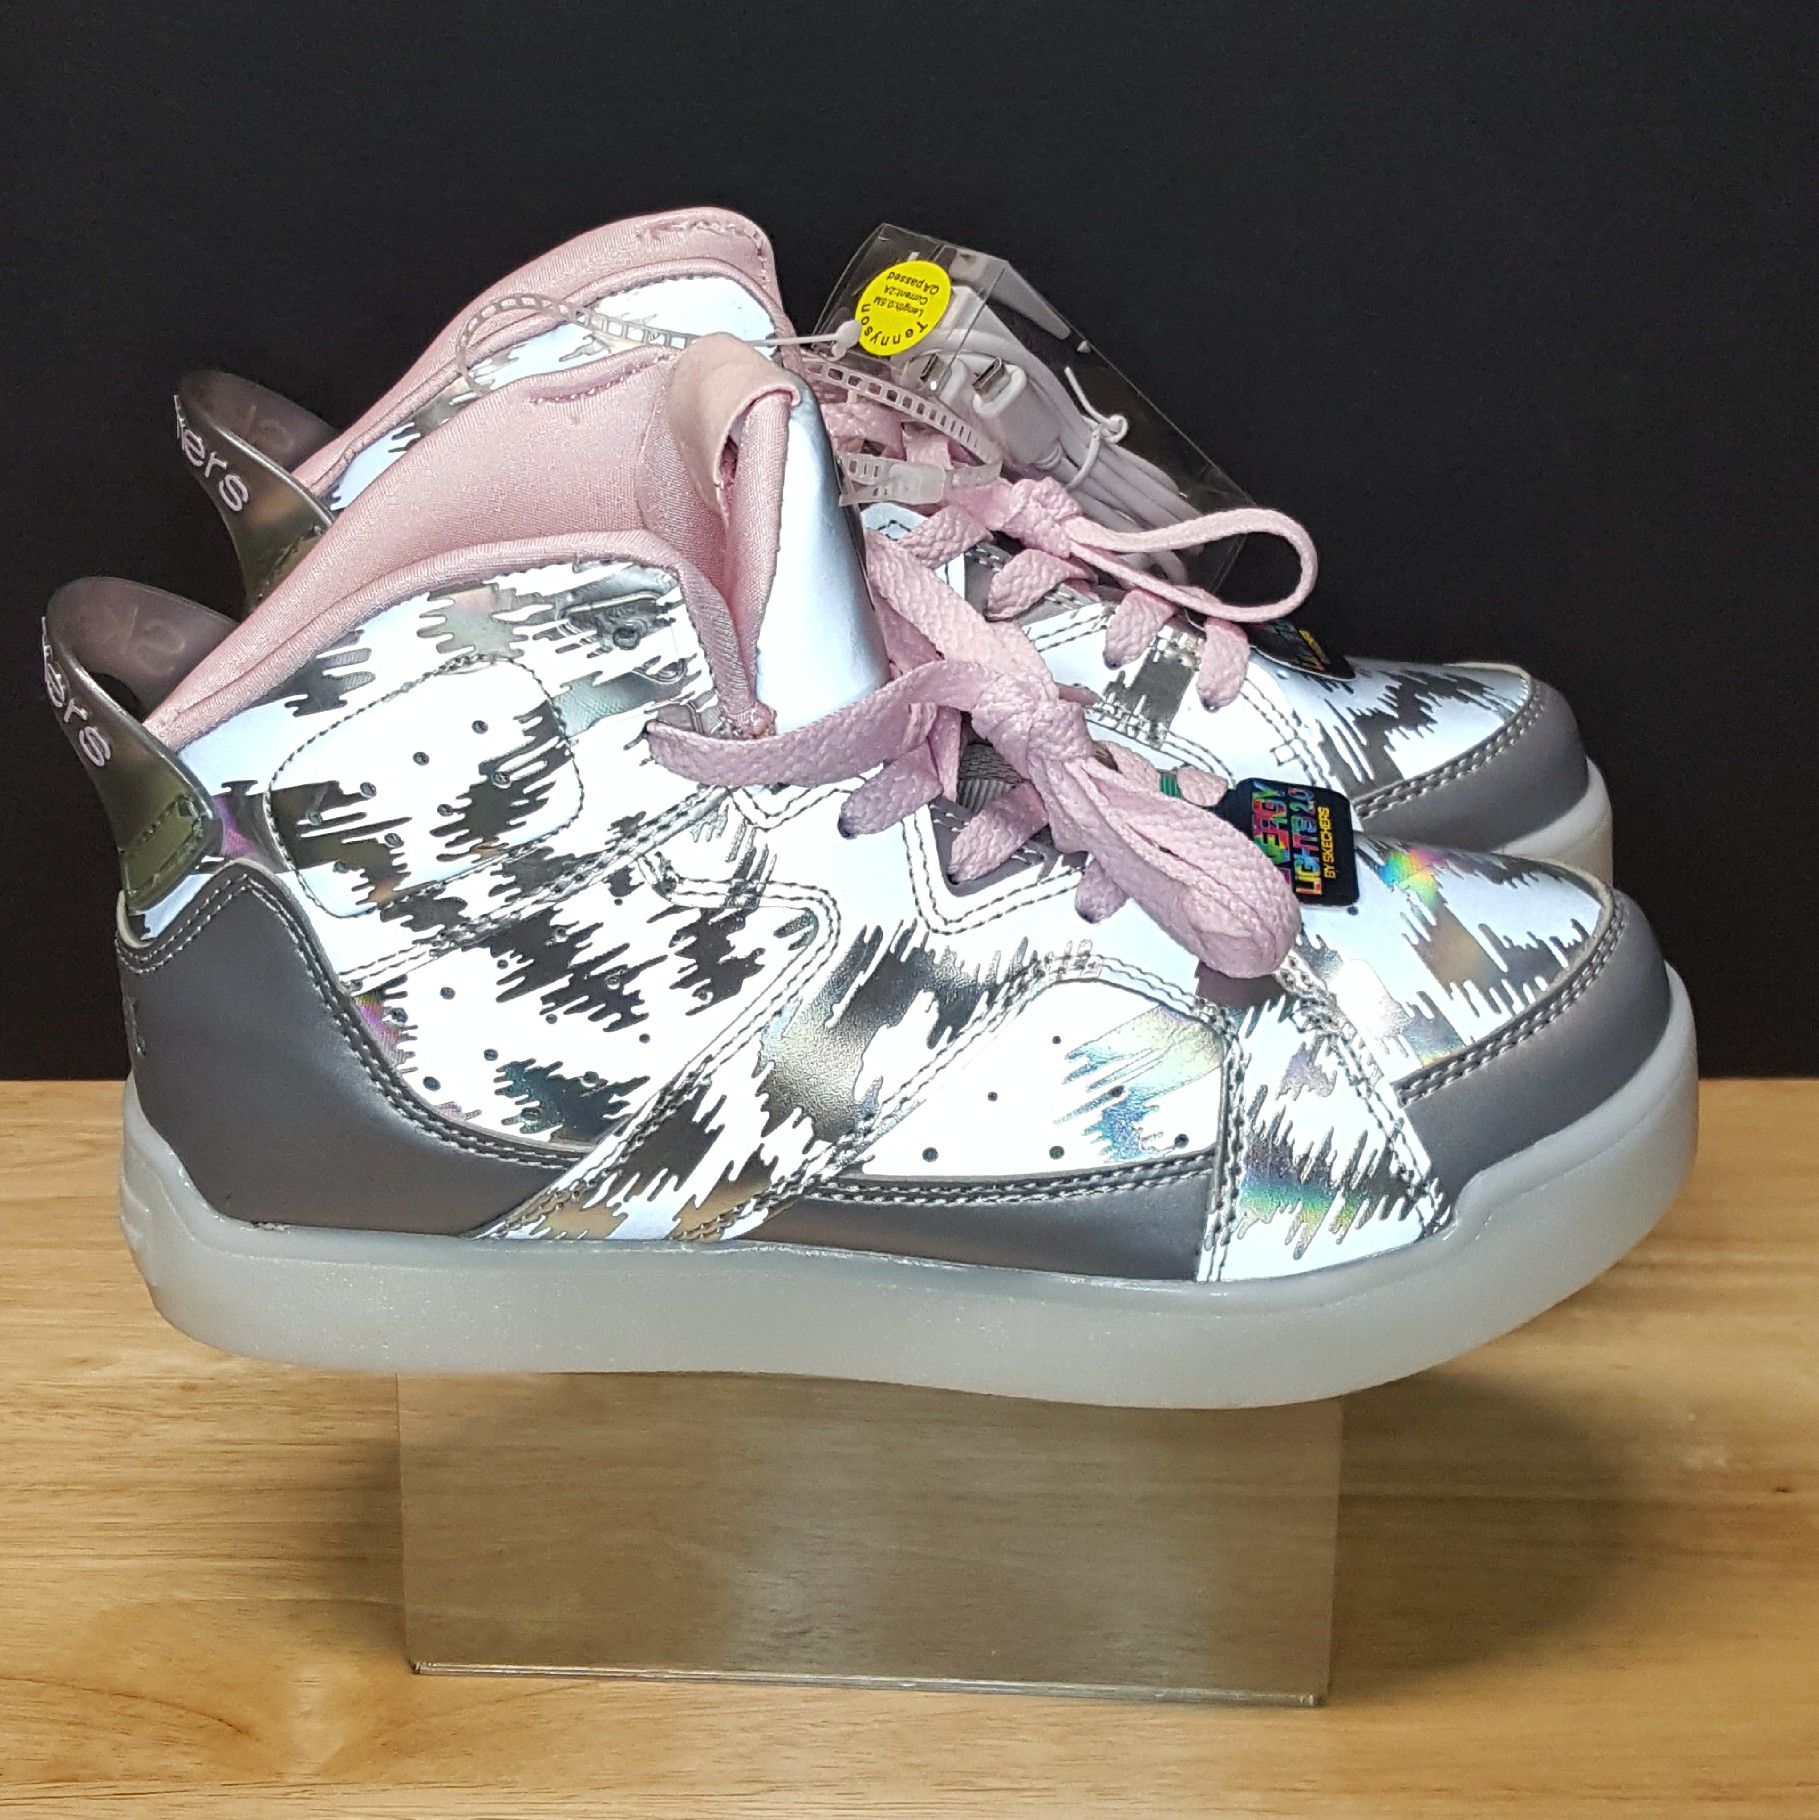 Skechers energy lights 2.0 SN20090L Size Pink Reflective for Sale in Augusta, GA - OfferUp